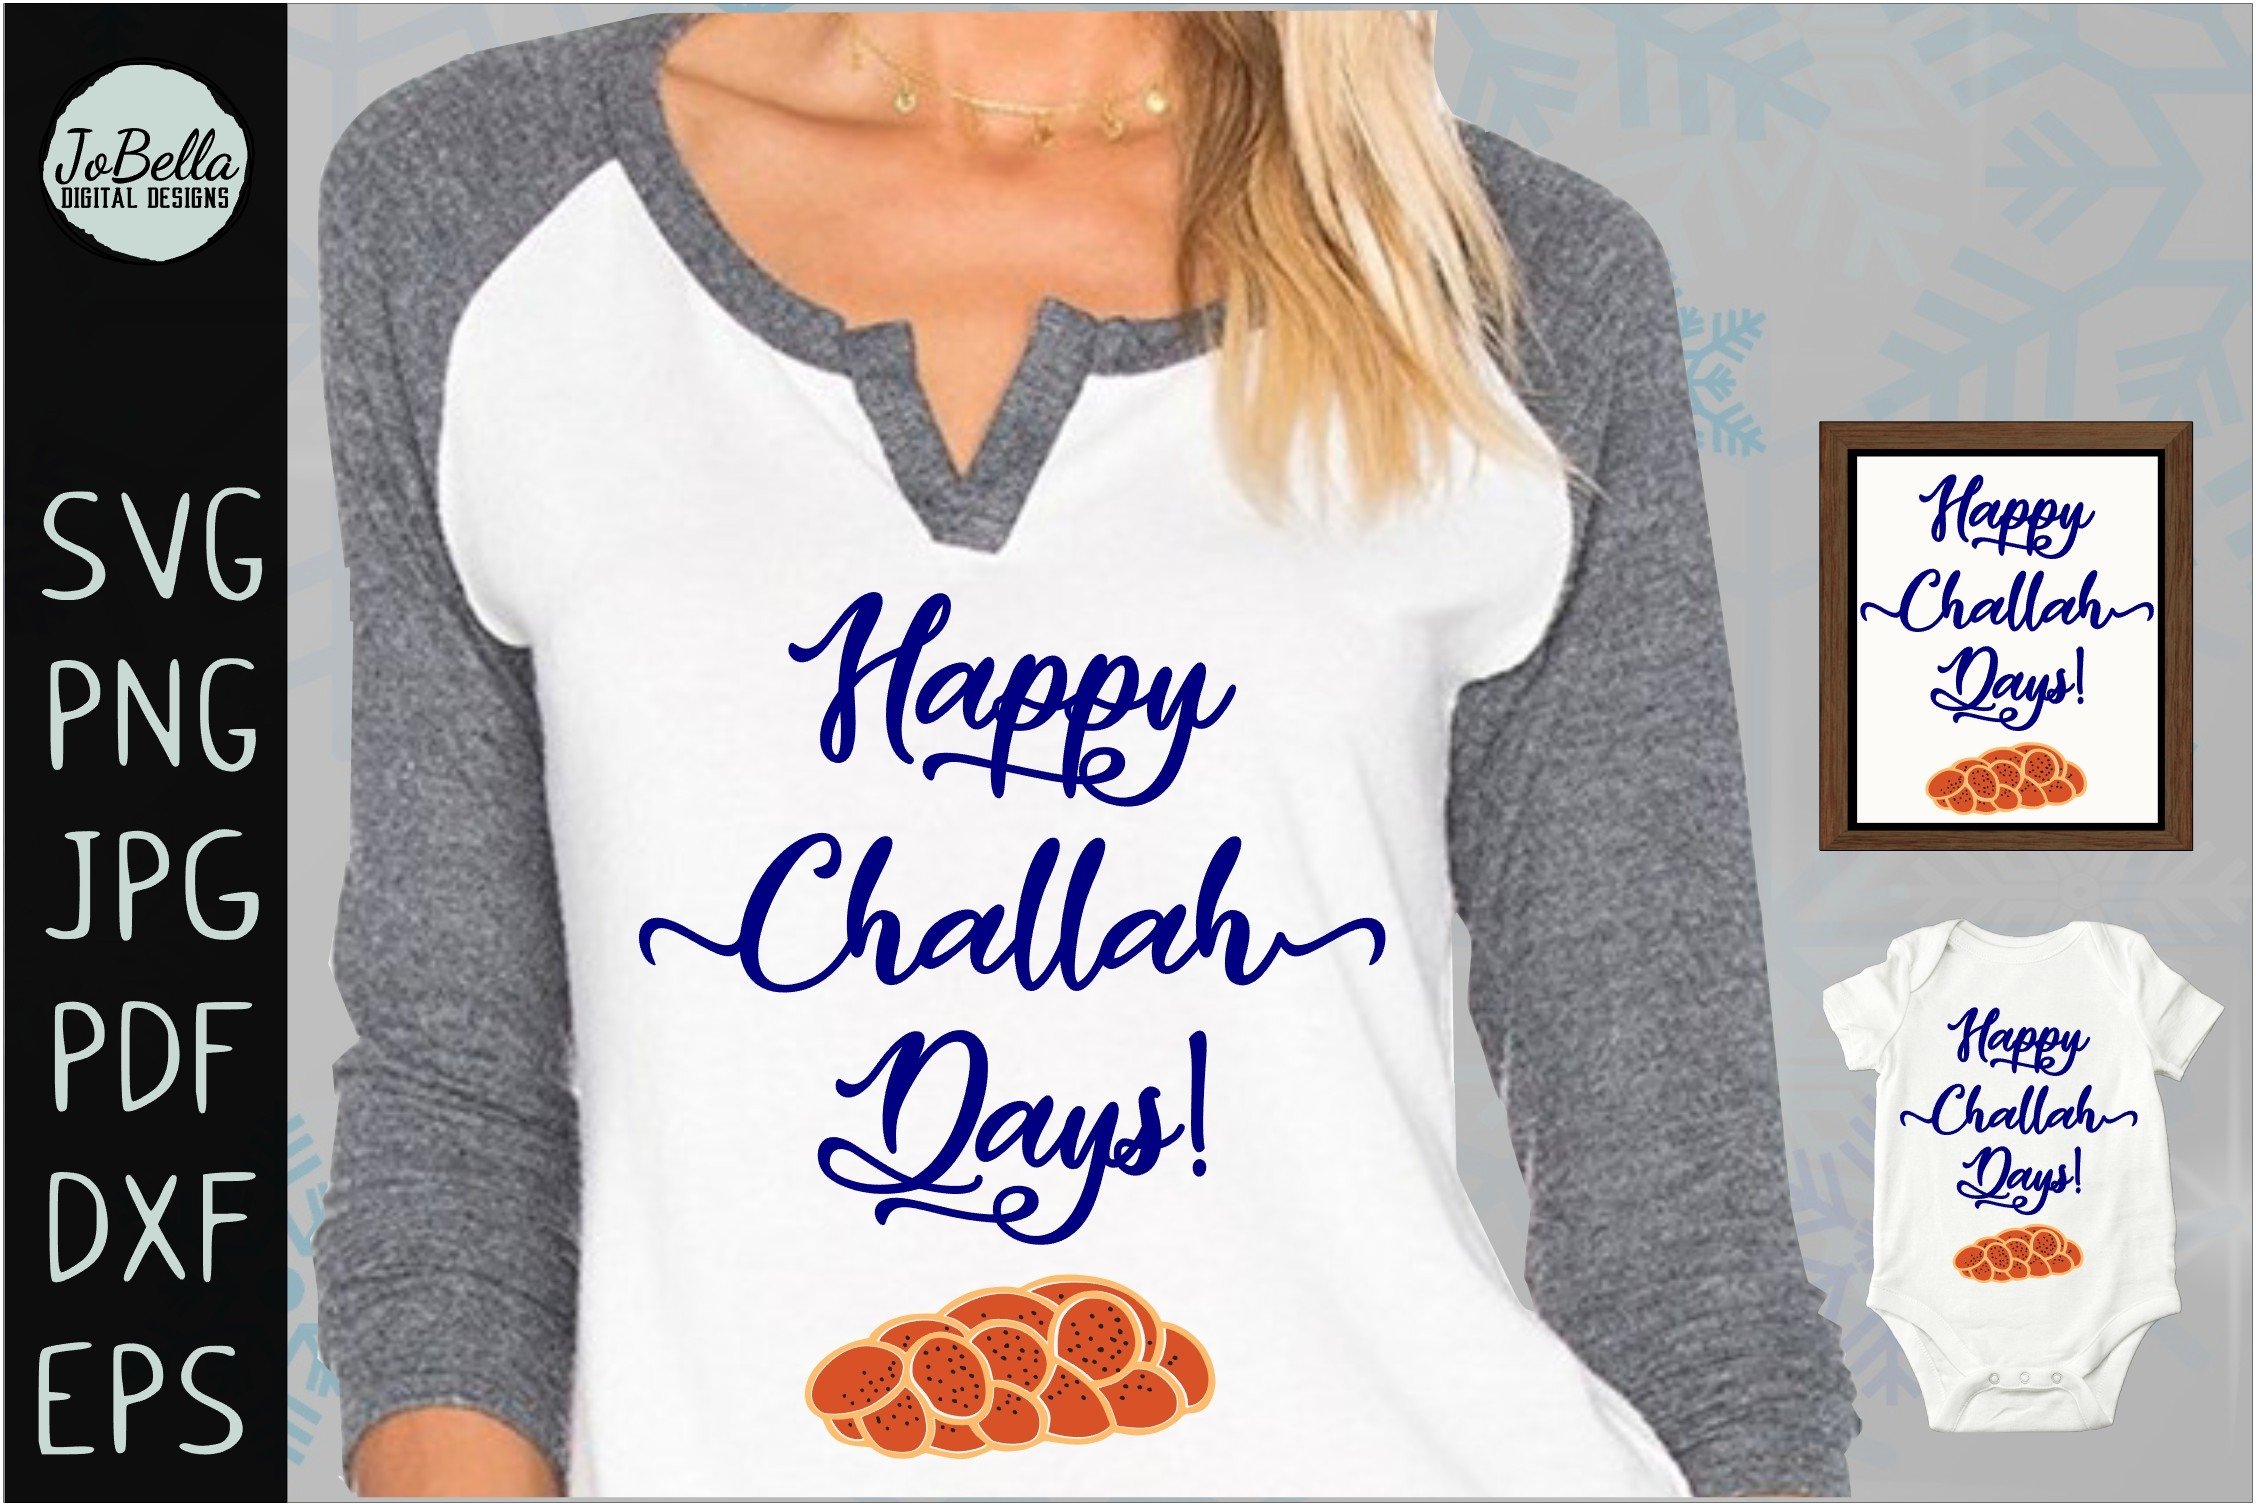 Shirt with the lettering "Happy Challah Days" on woman.